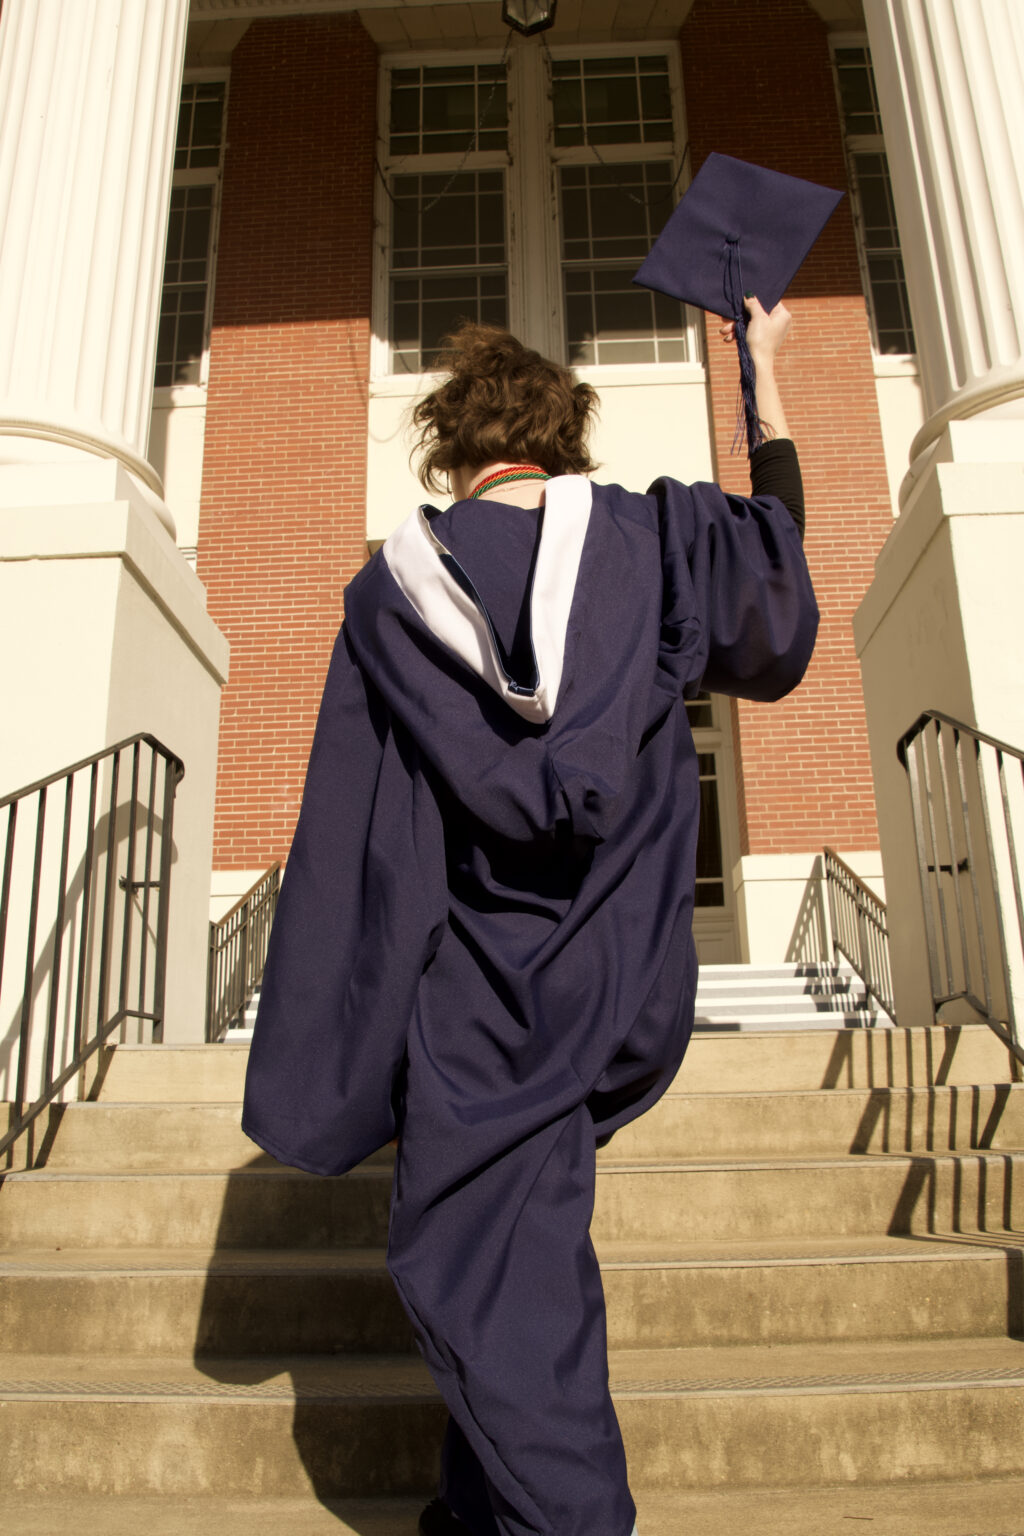 Student dressed in graduation regalia going up steps.